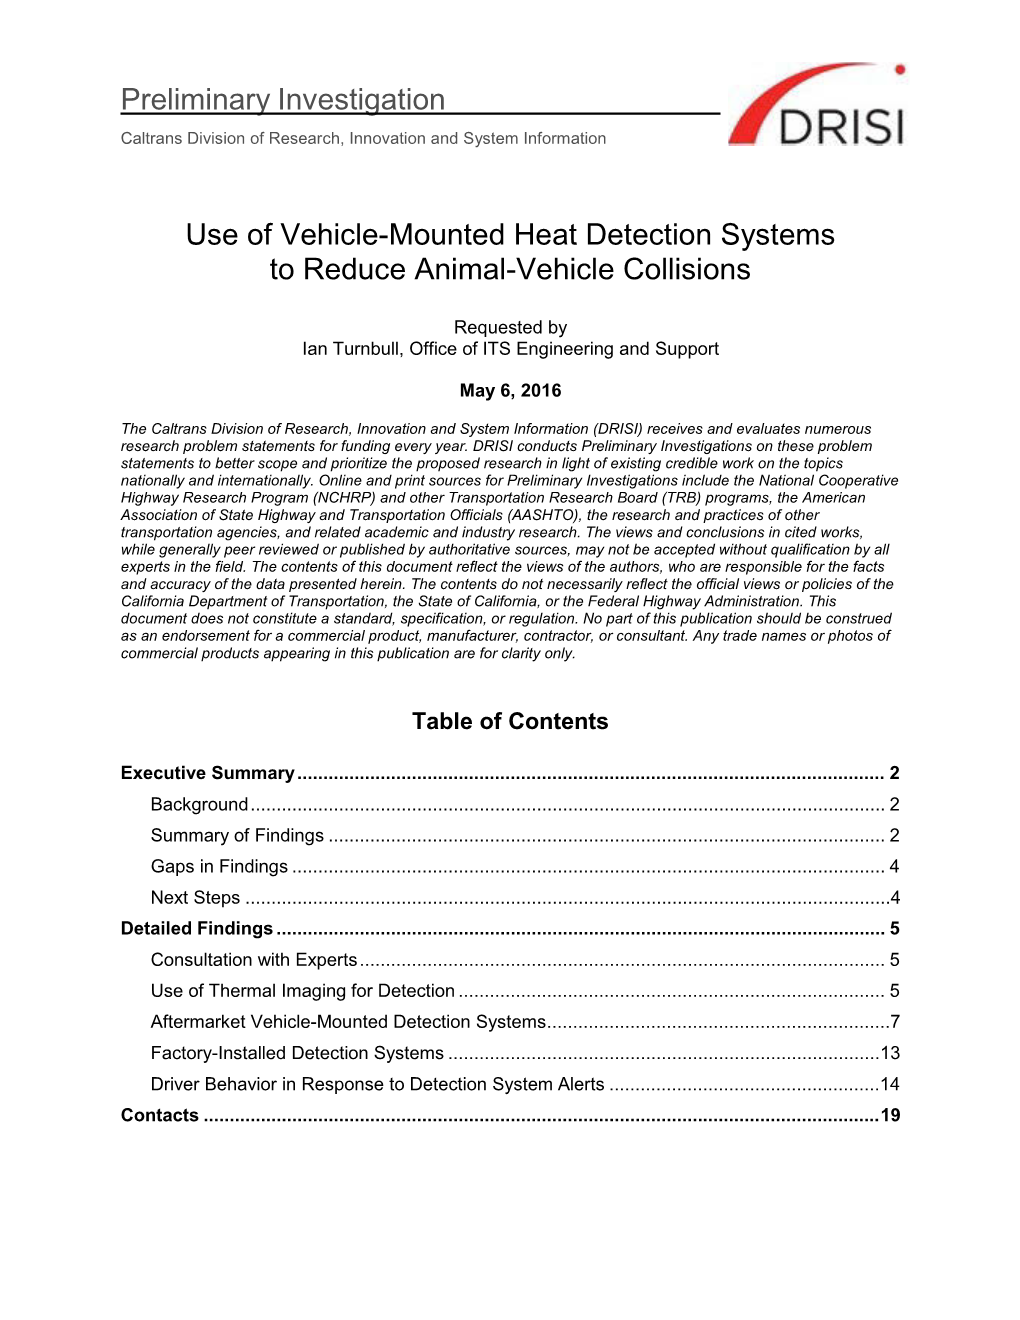 Use of Vehicle-Mounted Heat Detection Systems to Reduce Animal-Vehicle Collisions